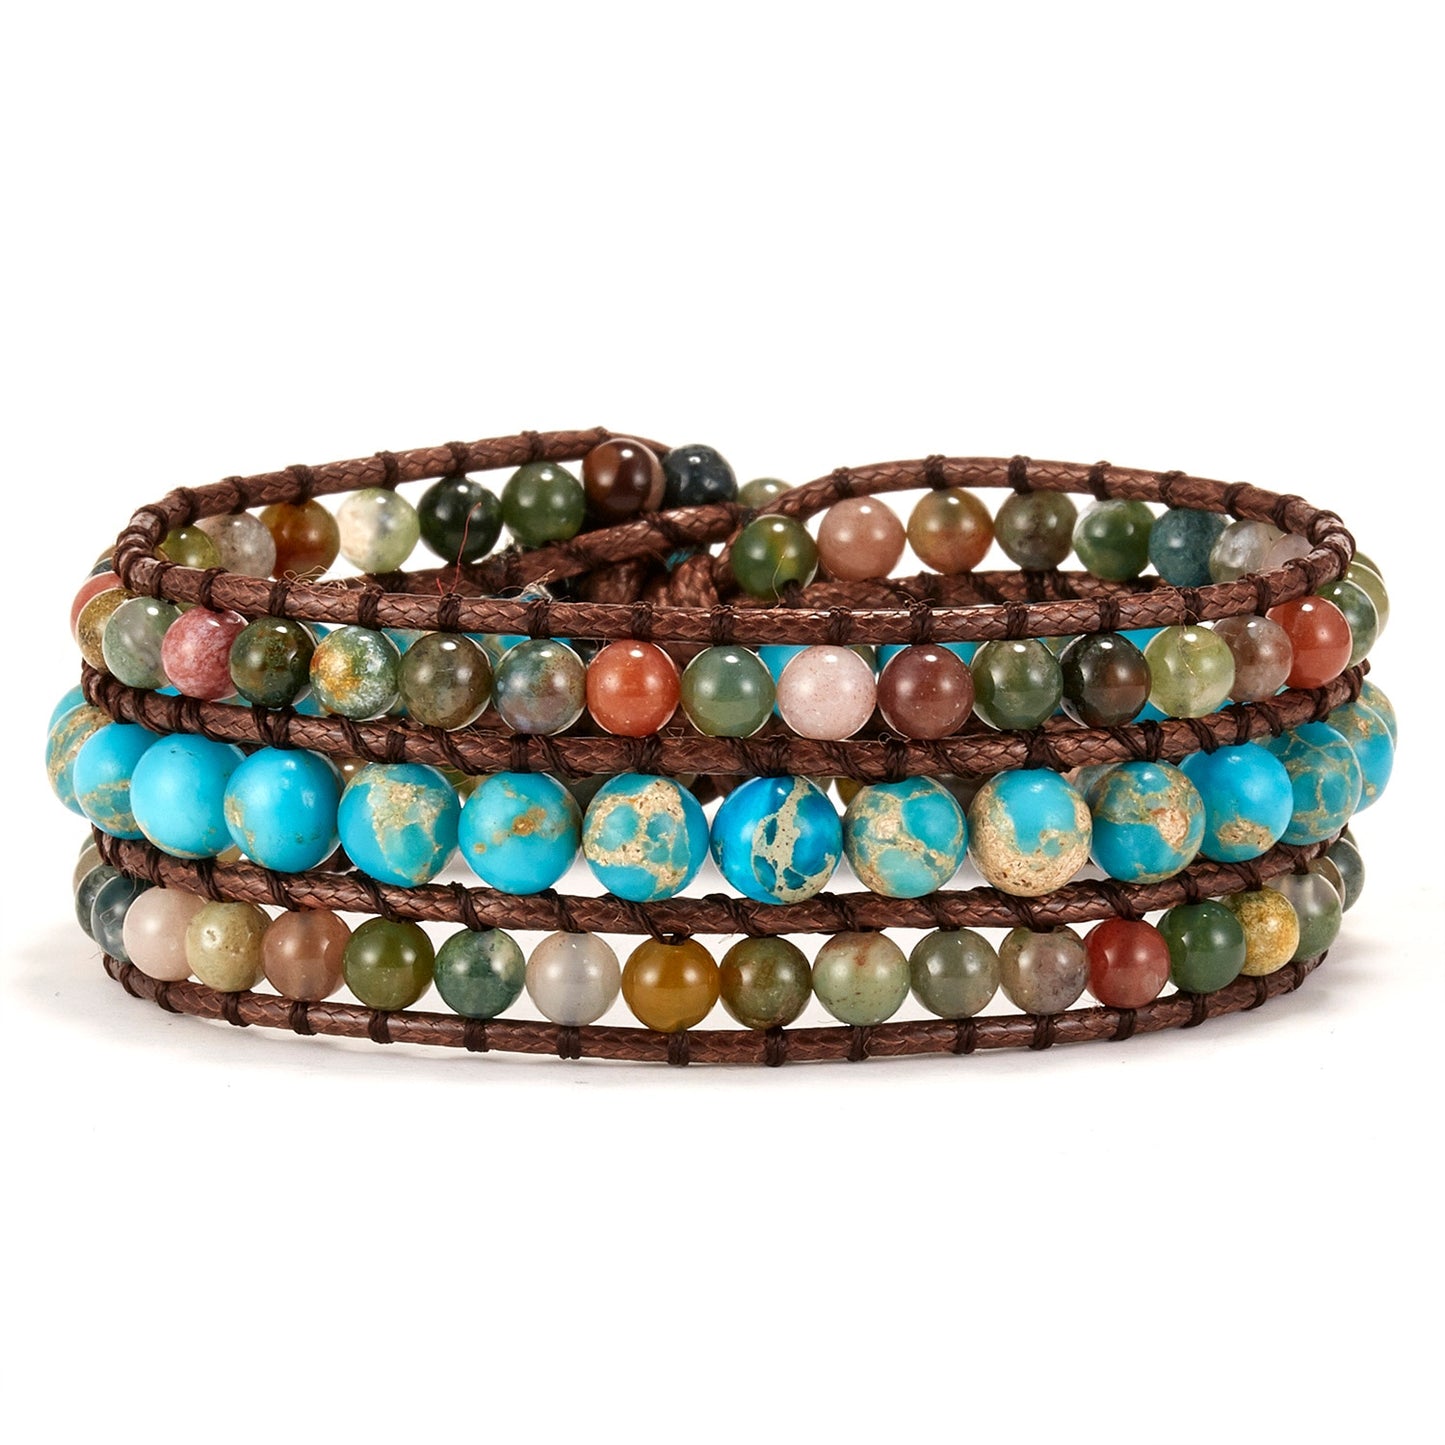 New Fashion Mixed Color Natural Stone Bracelet For Women Men Chakra Heart Wrap Leather Chain Bracelet&Bangle Charm Jewelry - BR18Y0556 / Adjustable